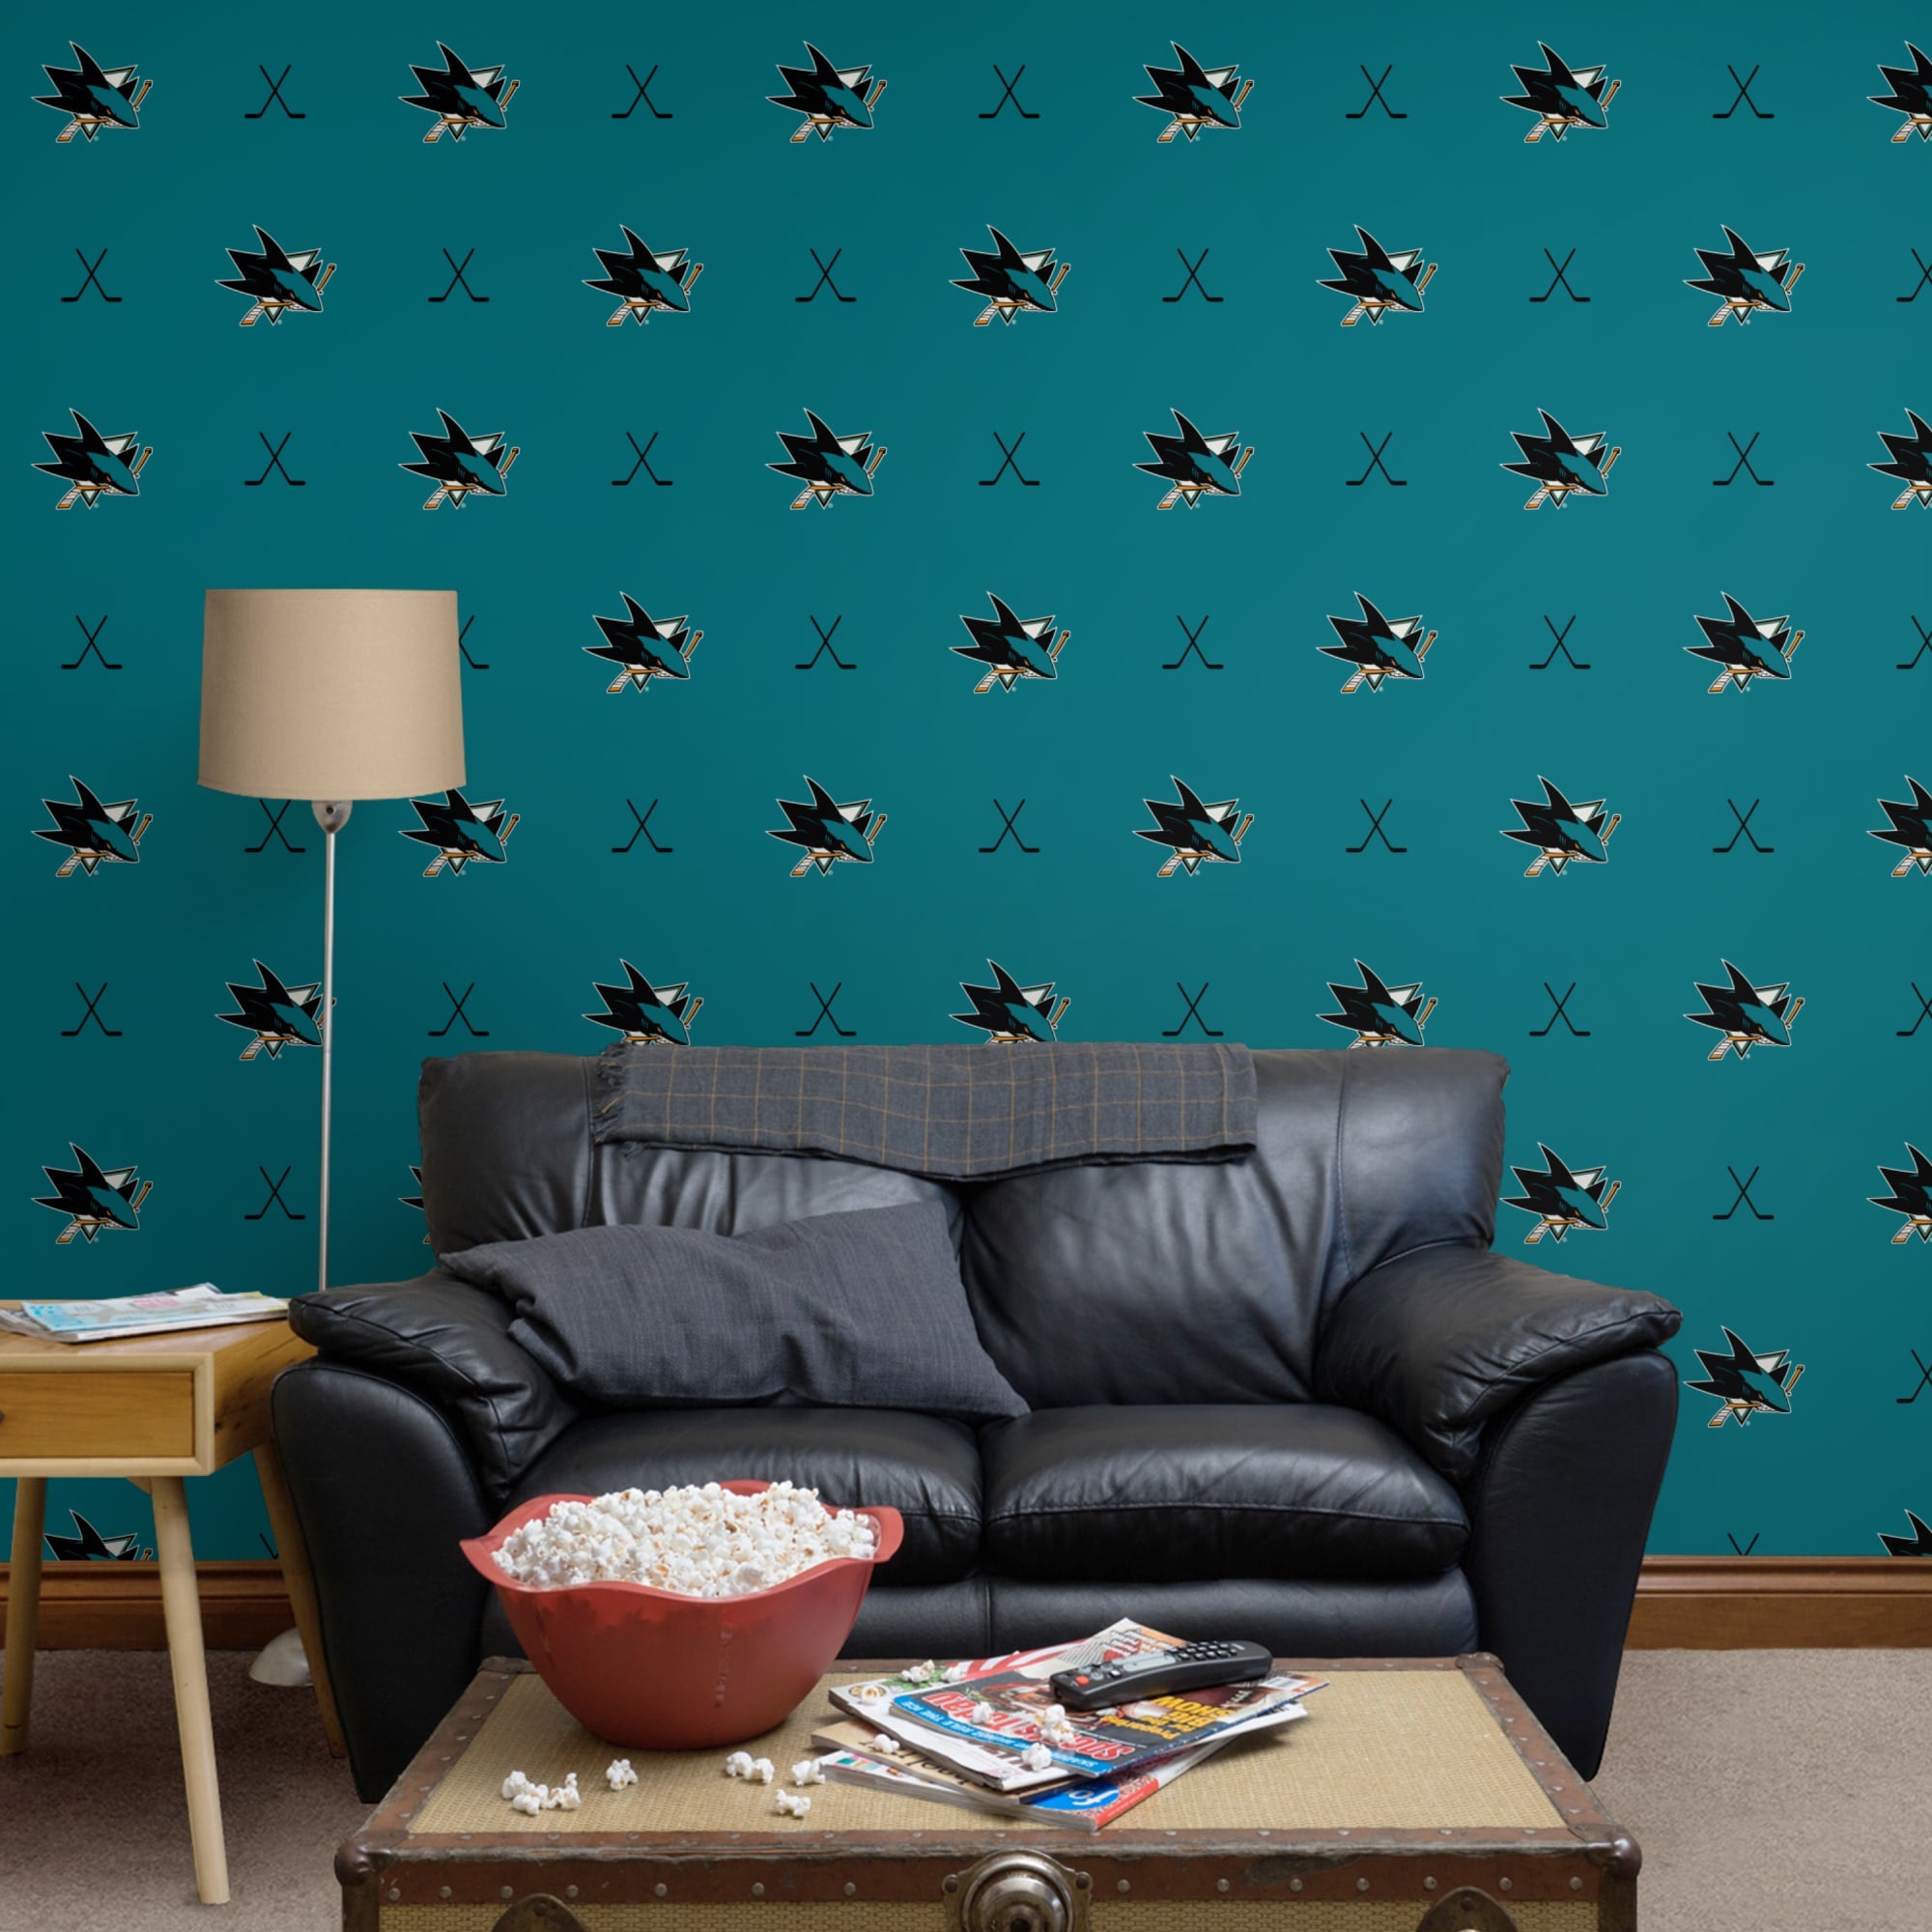 San Jose Sharks: Sticks Pattern - Officially Licensed NHL Removable Wallpaper 12" x 12" Sample by Fathead